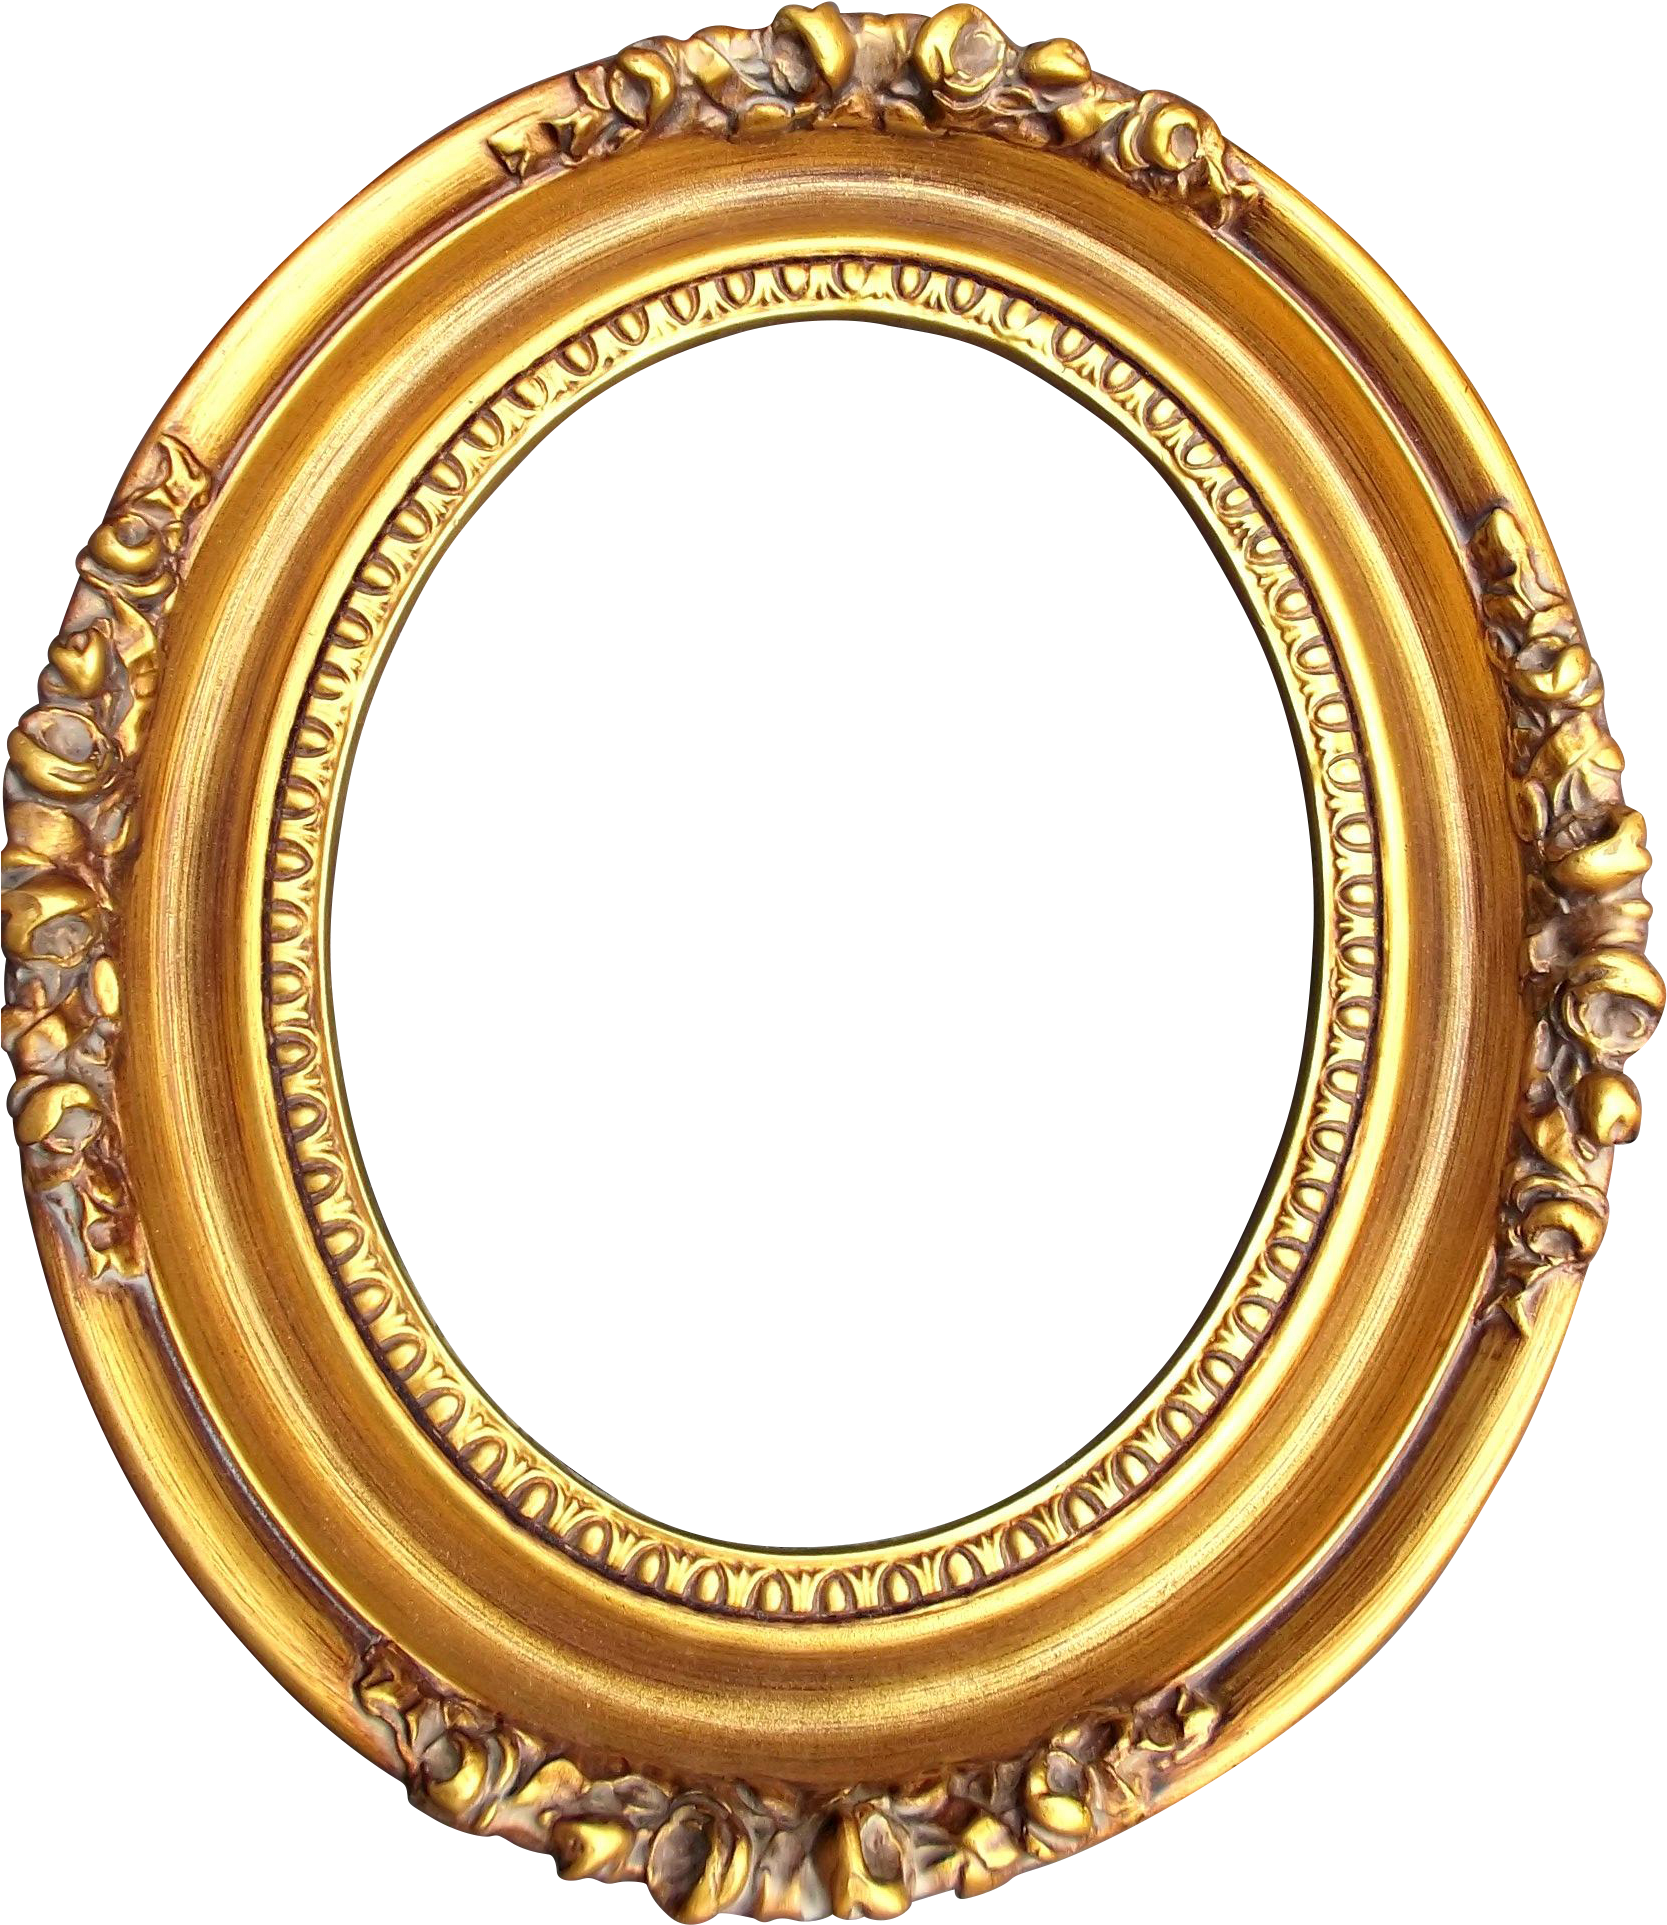 Free Gold Oval Frame Png, Download Free Gold Oval Frame Png png images